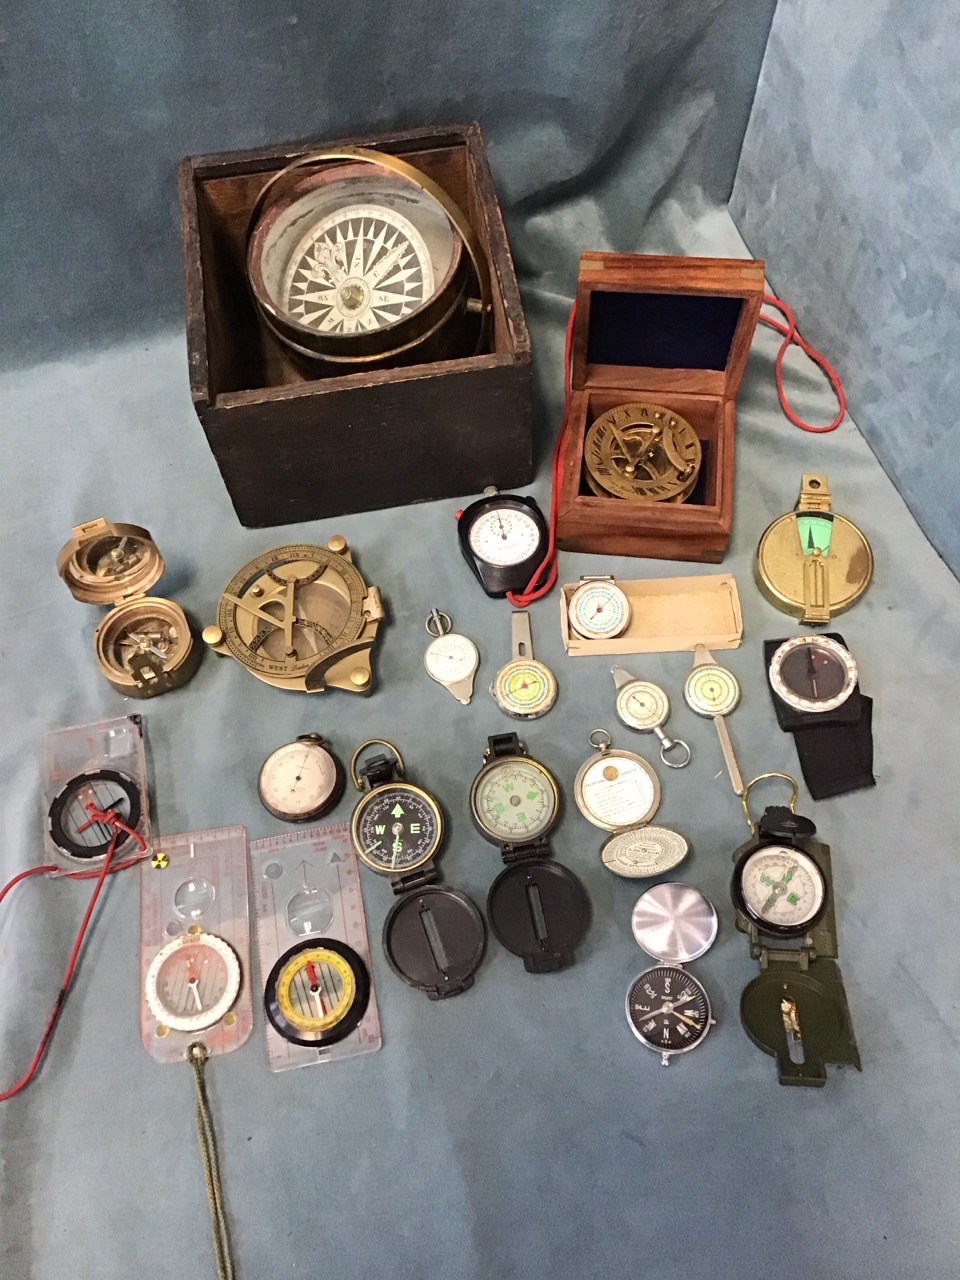 Miscellaneous navigational instruments - orienteering & sighting compasses, an antique oak boxed